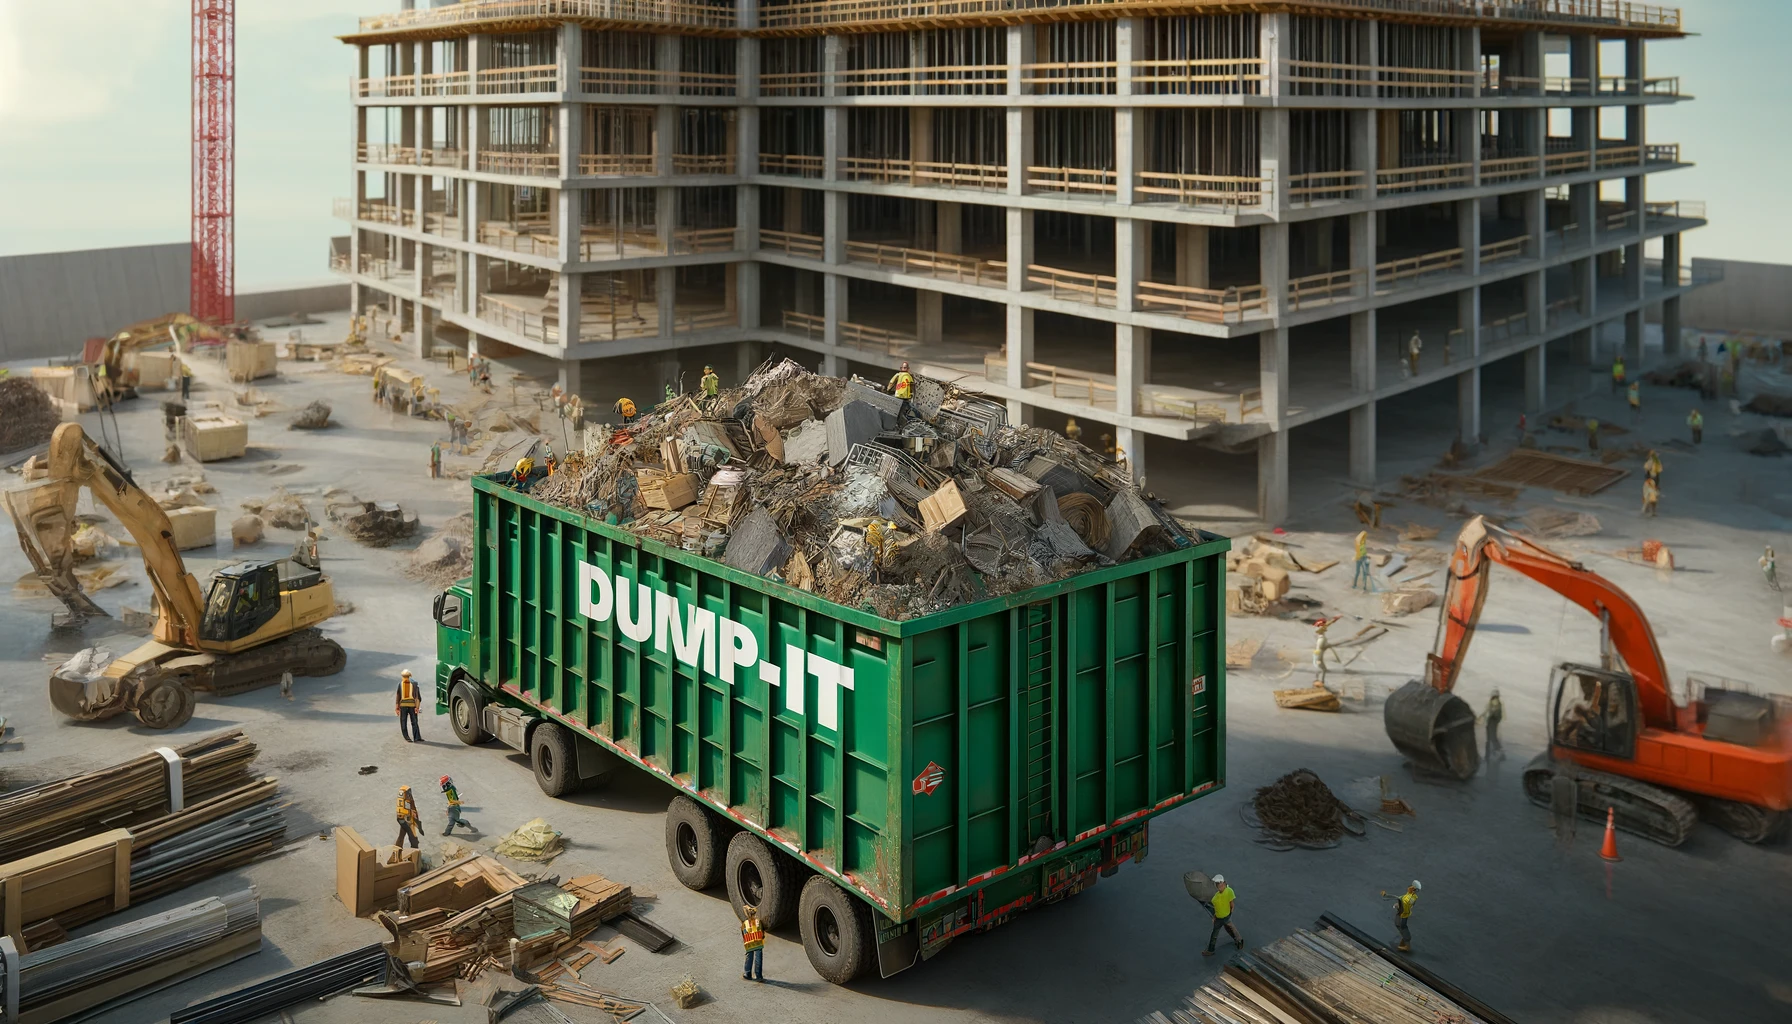 Rent a Dumpster with Dump-It – Fast & Easy